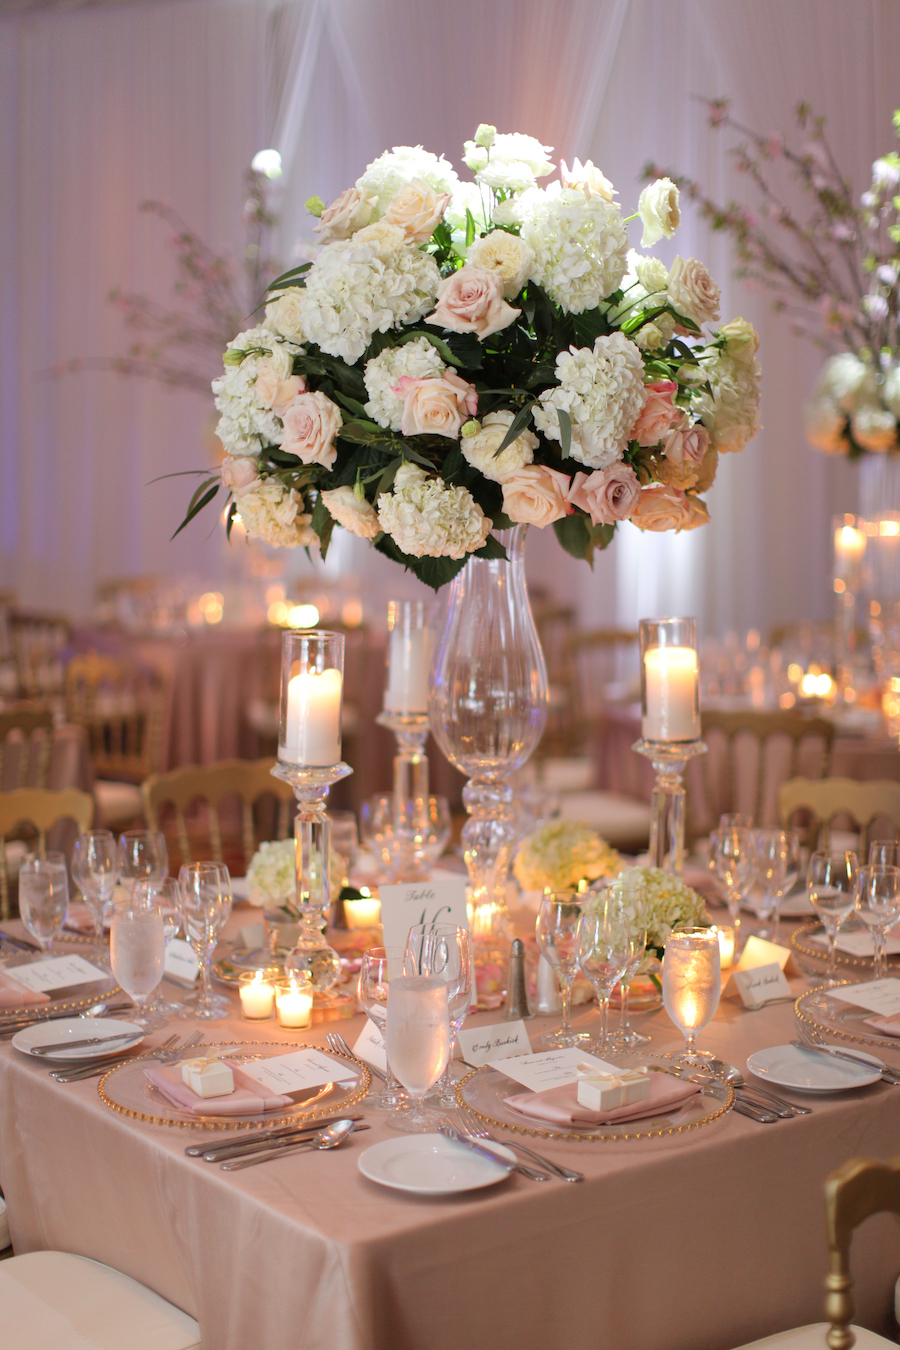 Wedding Reception Decor with Glass Beaded Chargers, Candles and Tall, White Floral Centerpieces